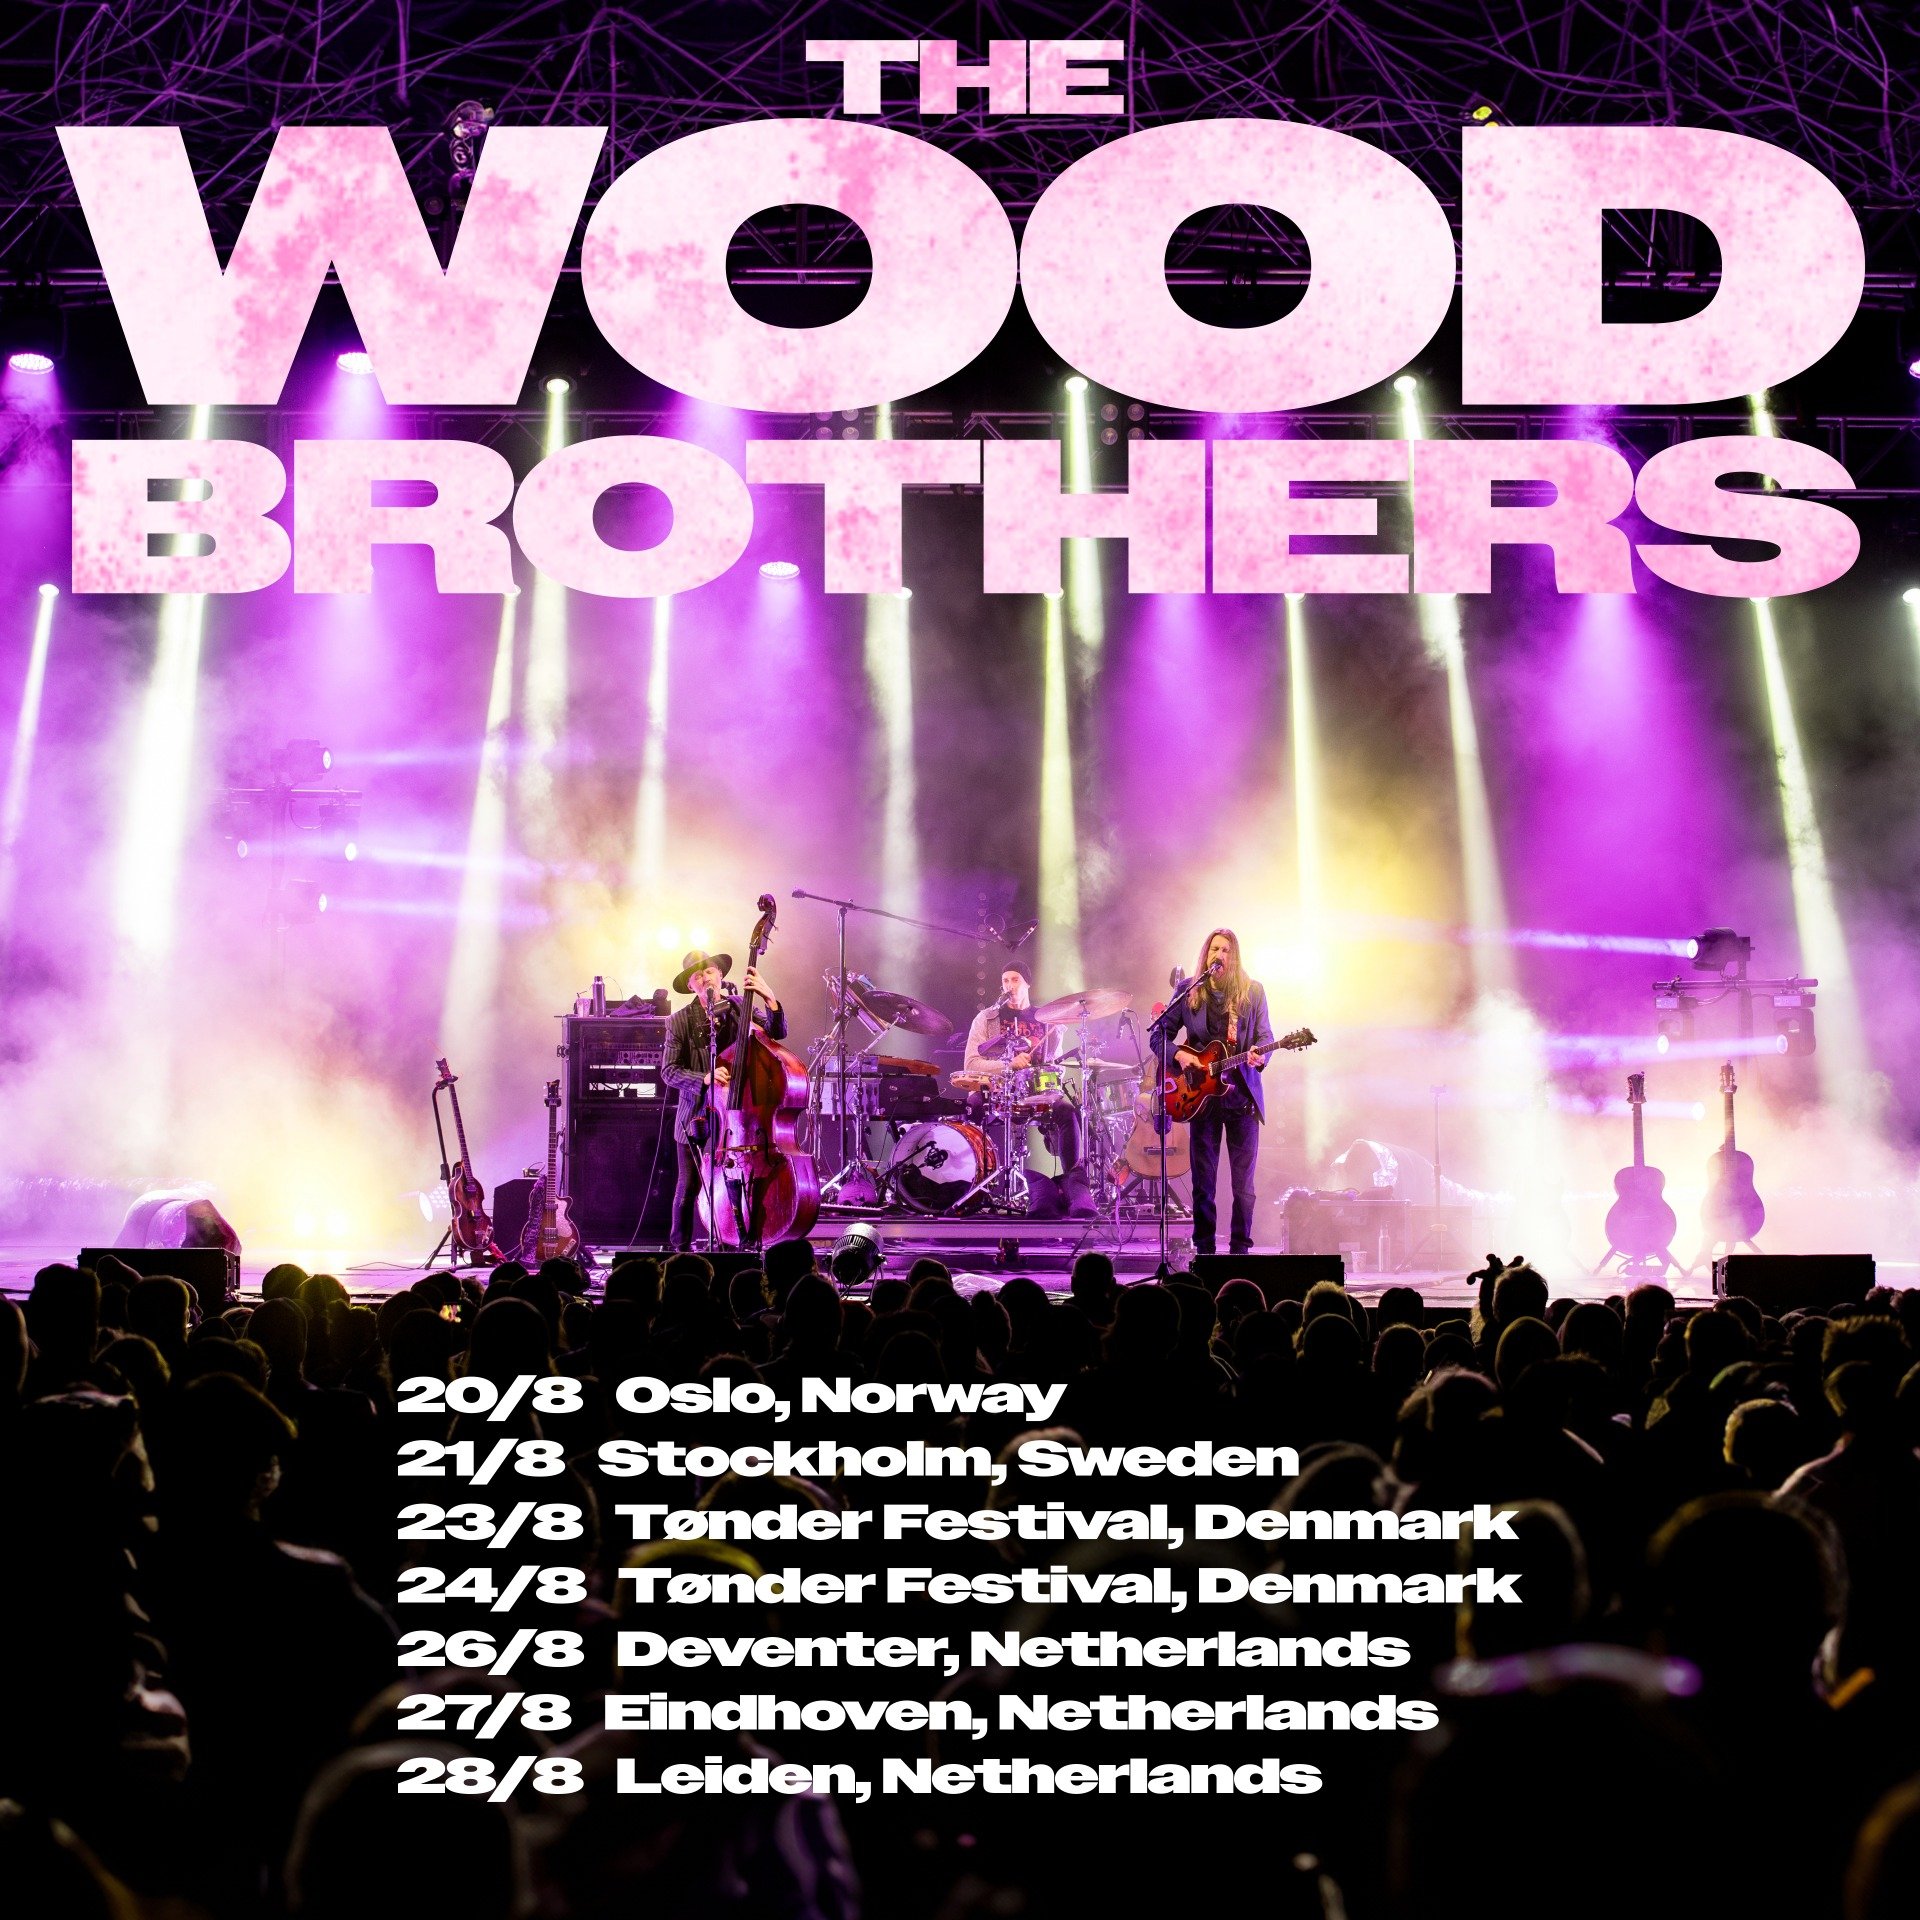 We're heading back to Europe! And we are ready to play in some new cities for our friends over in Norway, Sweden, Denmark, &amp; the Netherlands. Tickets on sale this Friday, May 3rd!

8/20 - Oslo, Norway @cosmopoliteoslo 
8/21 - Stockholm, Sweden @d